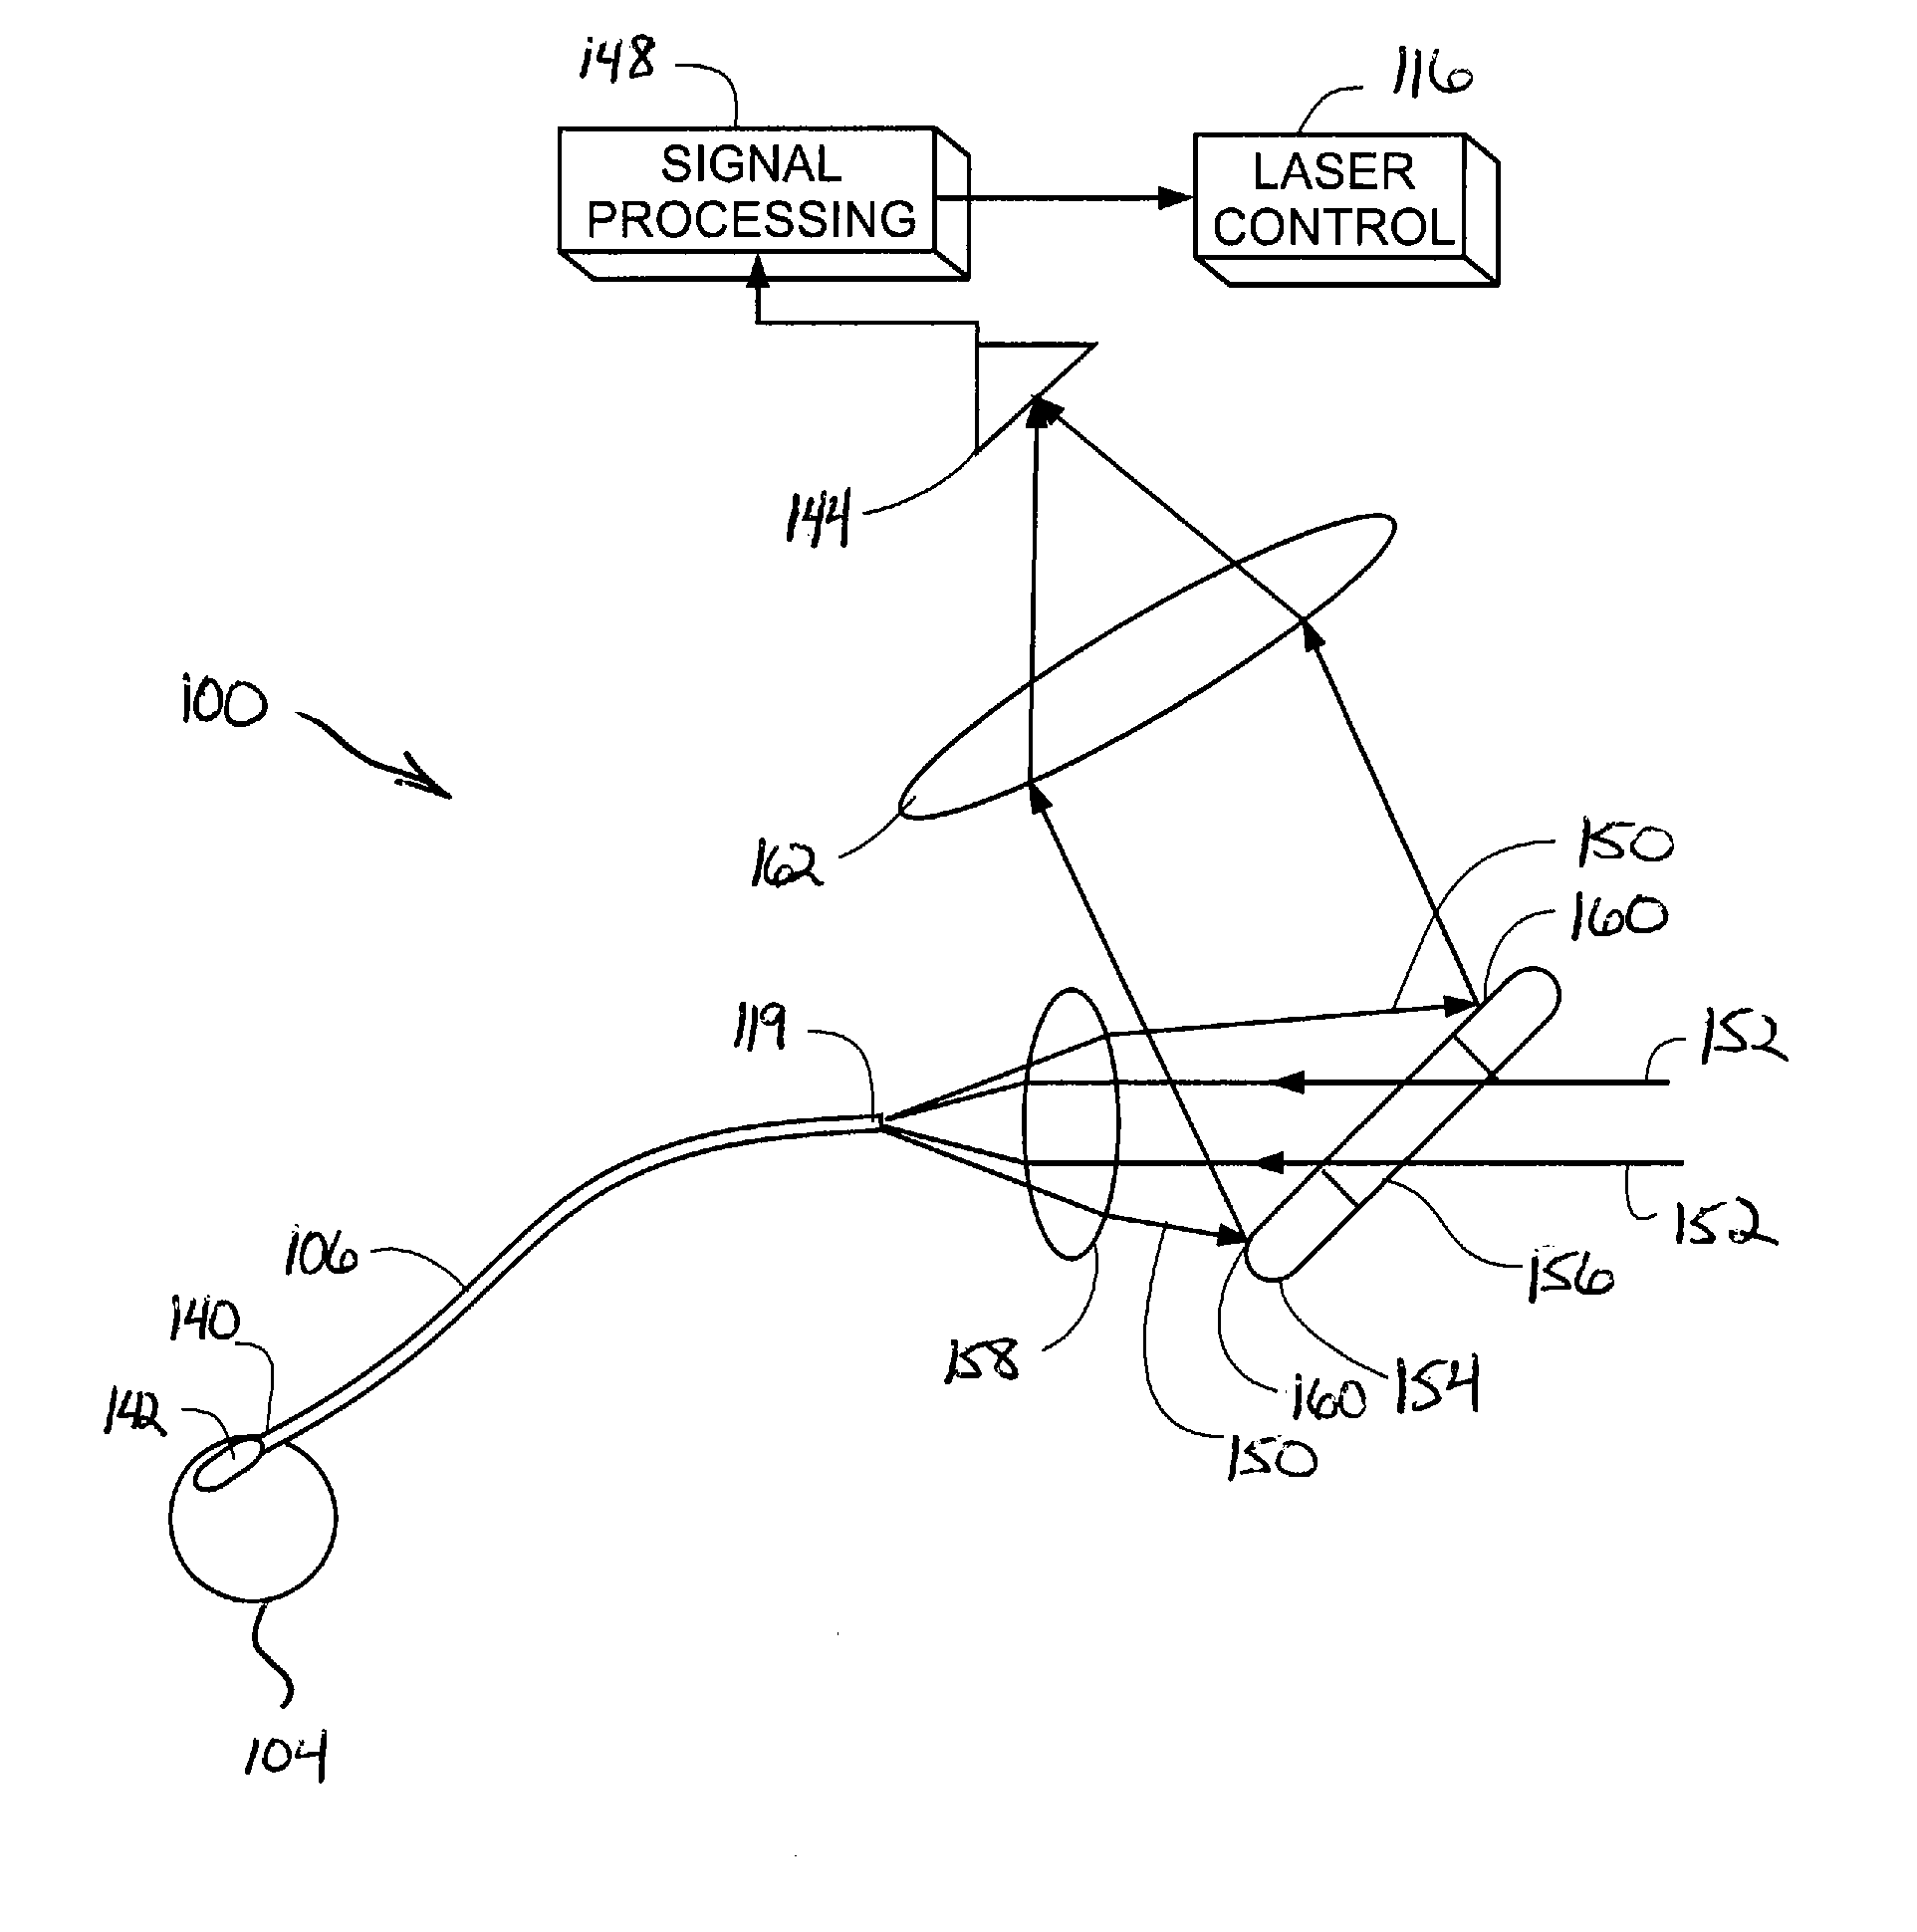 Fiber Damage Detection and Protection Device